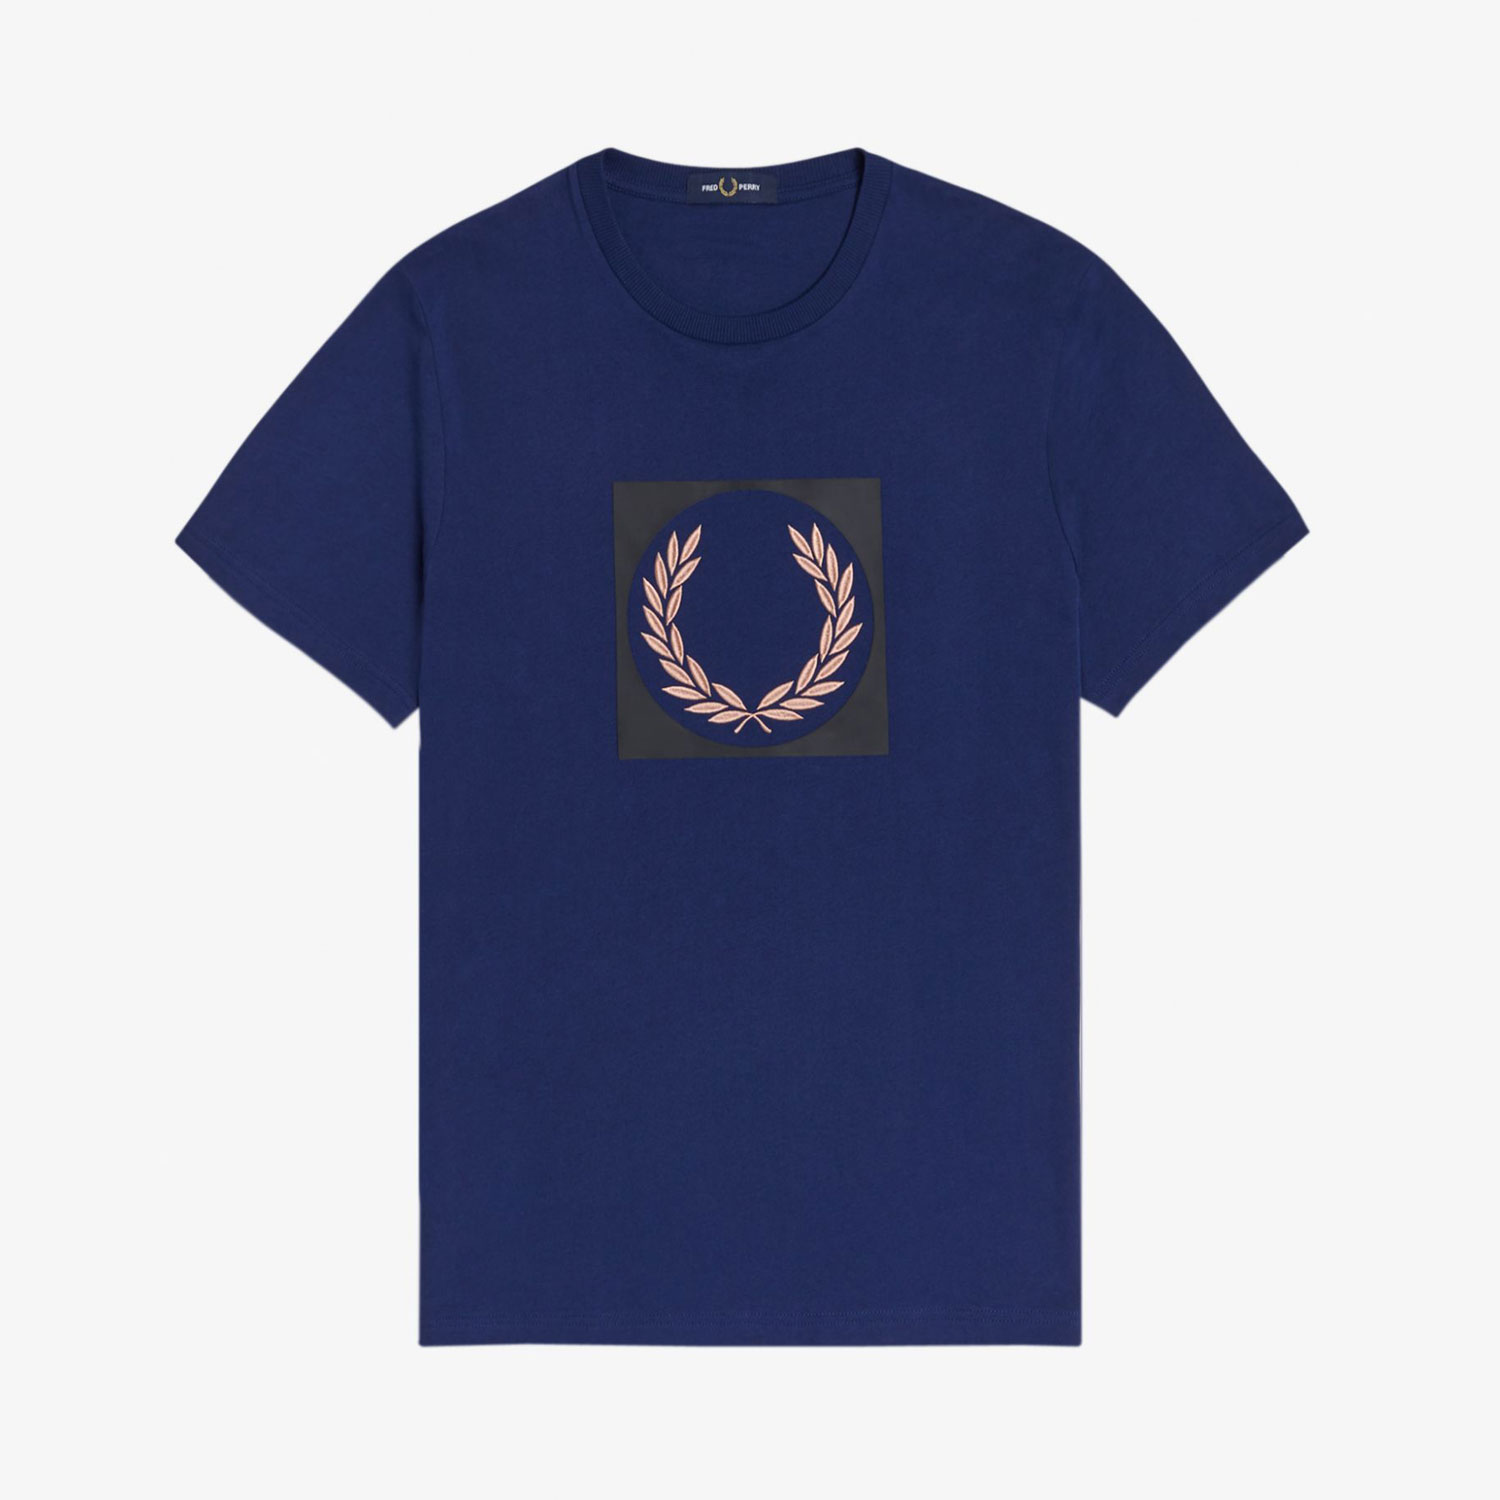 Fred Perry Laurel Wreath Graphic Tee - French Navy